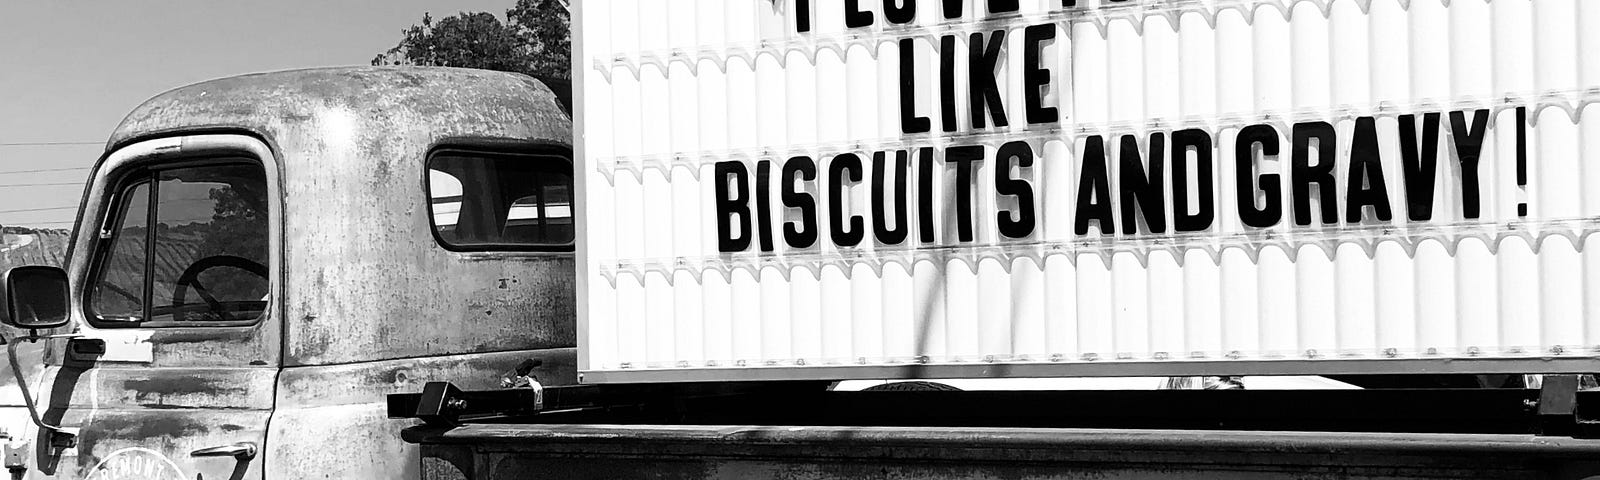 Pickup truck with flashing arrow sign in the bed of it. Saying on sign — I love you like biscuits and gravy